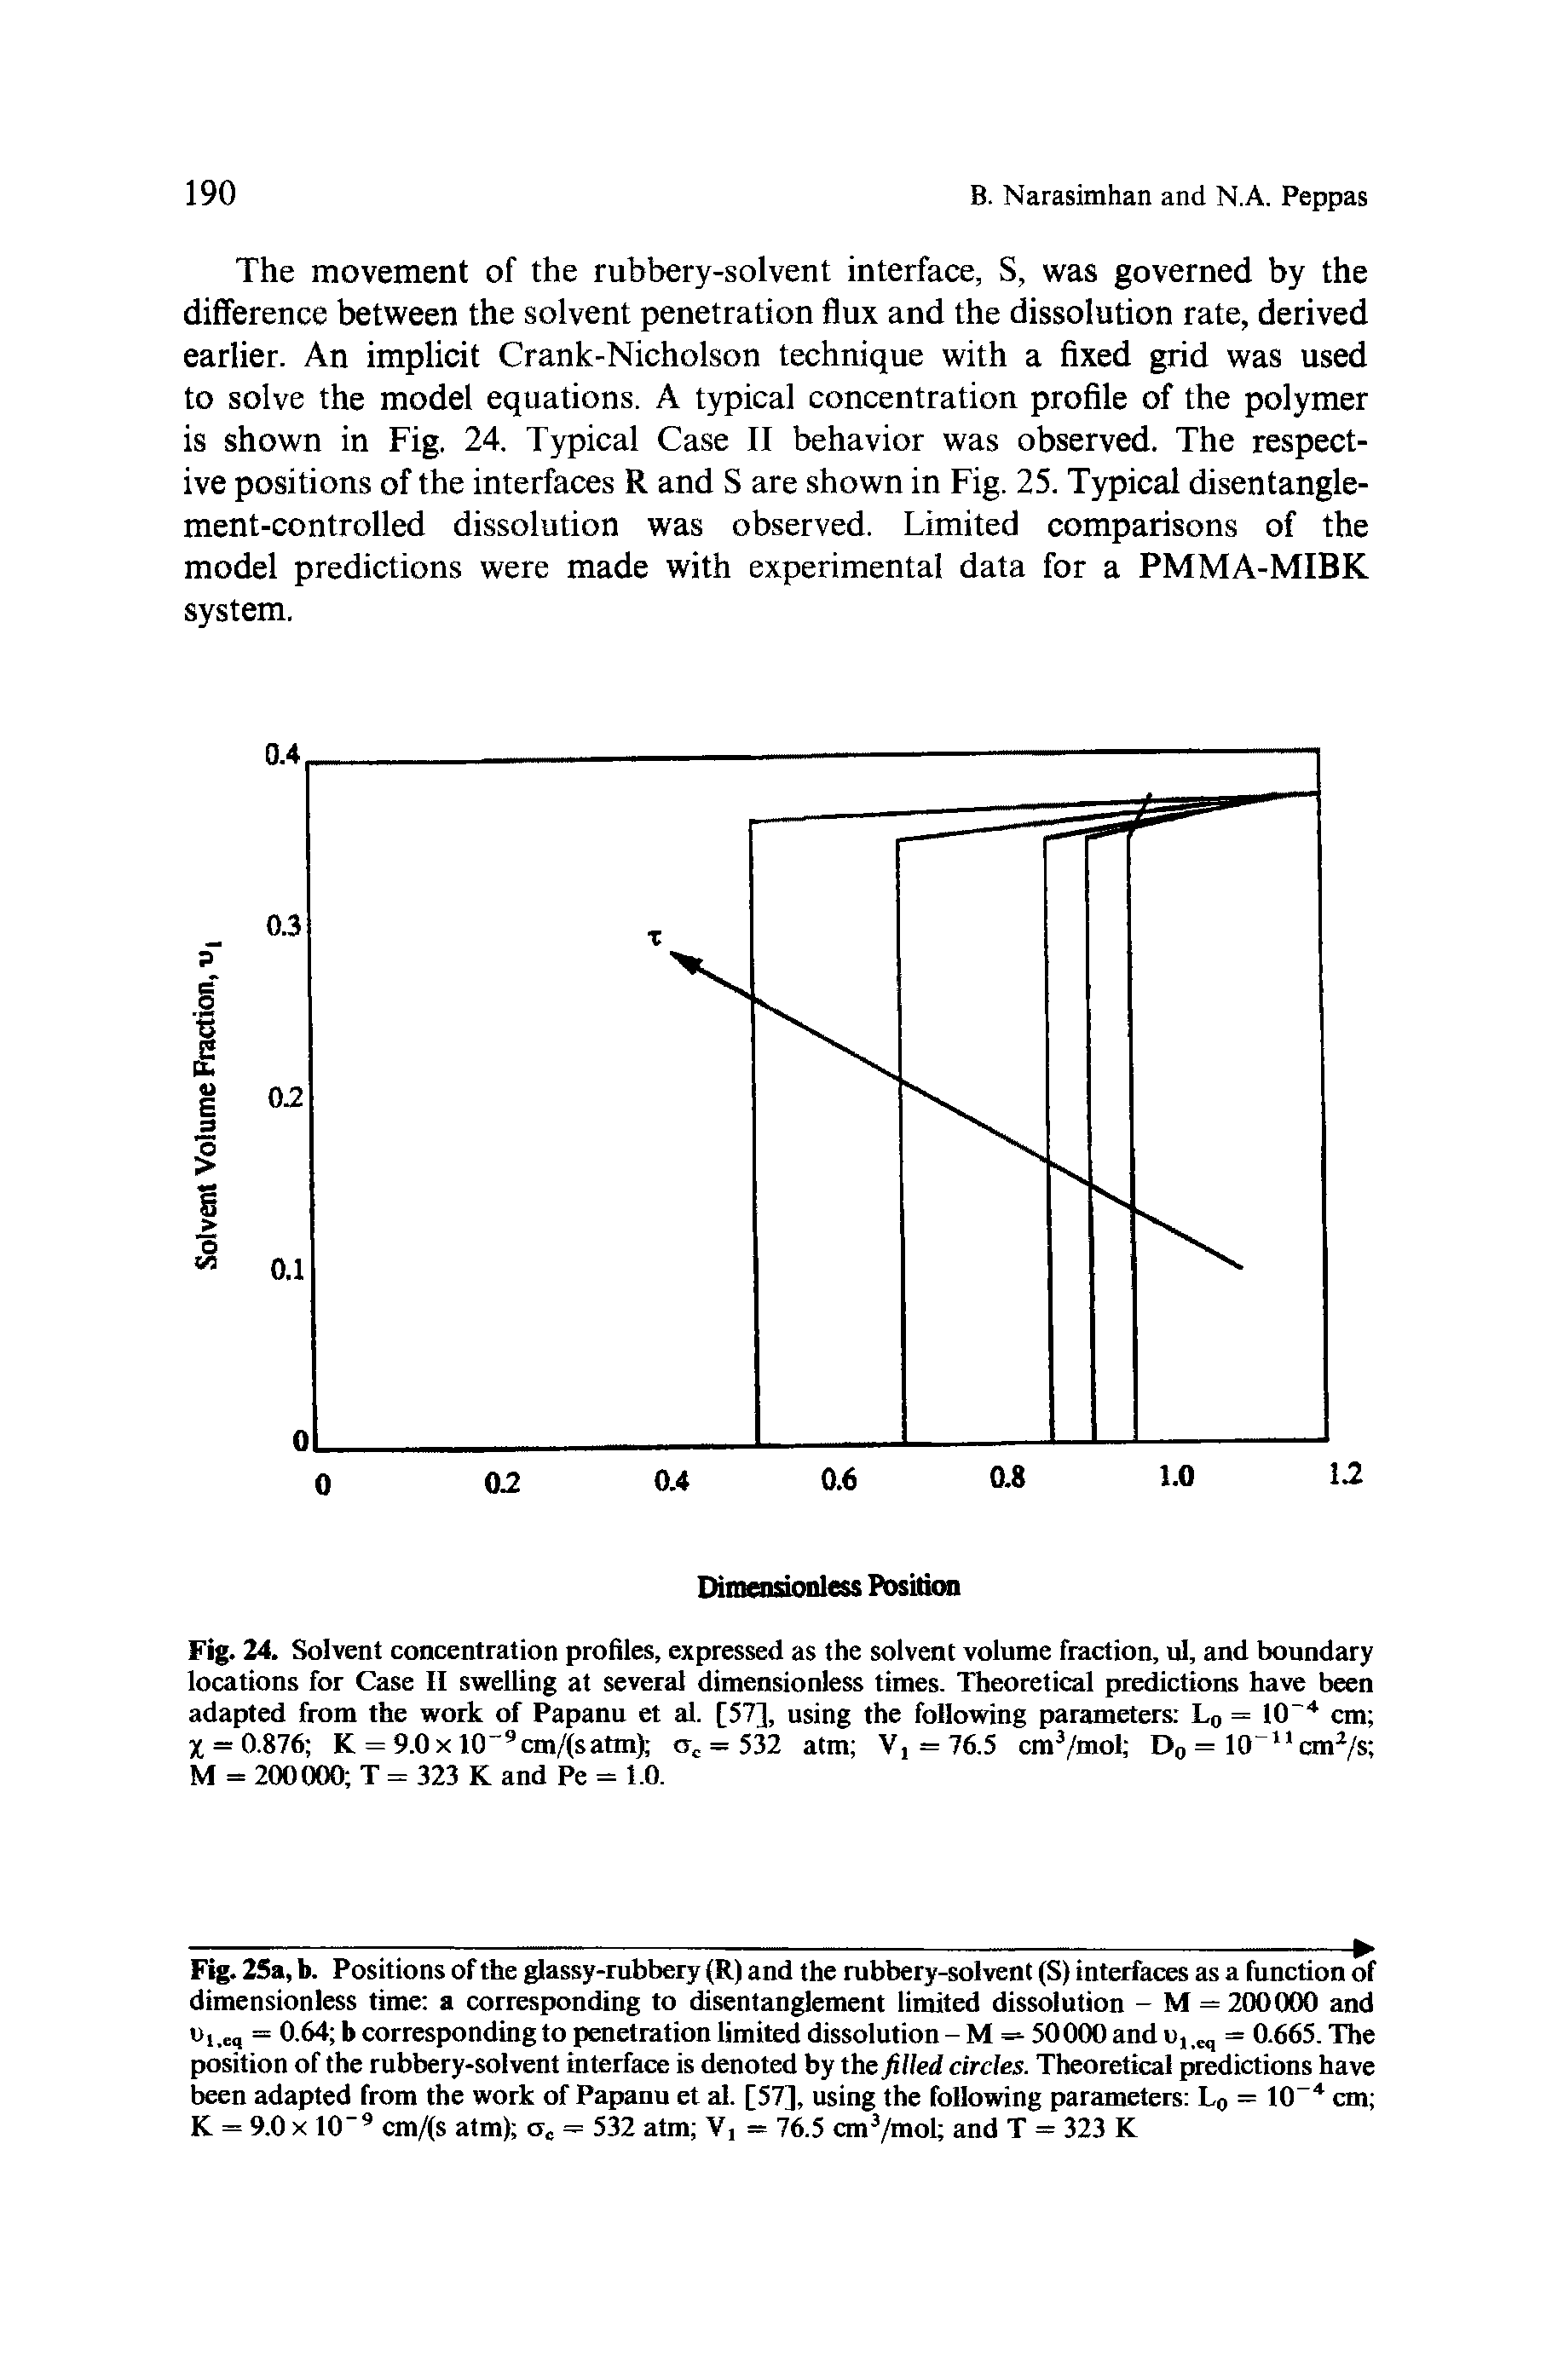 Fig. 24. Solvent concentration profiles, expressed as the solvent volume fraction, ul, and boundary locations for Case II swelling at several dimensionless times. Theoretical predictions have been adapted from the work of Papanu et al. [57], using the following parameters Lq = 10 cm X = 0.876 K = 9.0x10" cm/(satm) a, = 532 atm V, = 76.5 cm /mol Dq = 10 " cm /s M = 200000 T = 323 K and Pe = 1.0.